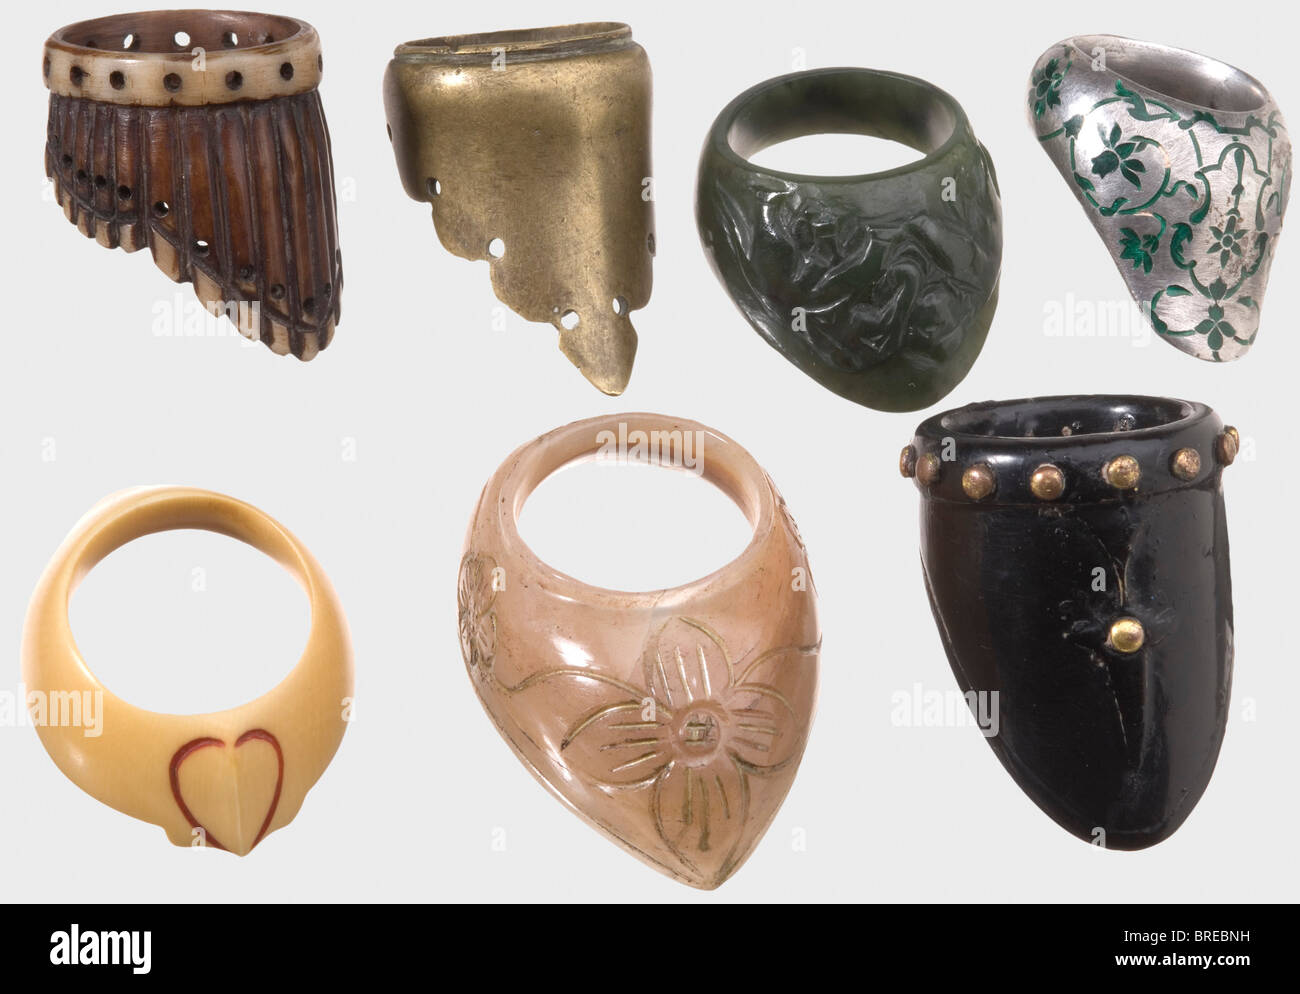 Seven Indian archer's thumb rings, 19th/20th century Different types and materials, made variously of horn, leather, green jade, agate, ivory, brass, and silver with enamelled floral designs. The jade ring is carved with fighting elephants carved, and the leather piece is surrounded with decorative gilt copper rivets. Lengths 40 to 51 mm. historic, historical, 19th century, jewellery, jewelry, noble, precious, object, objects, stills, clipping, clippings, cut out, cut-out, cut-outs, Stock Photo